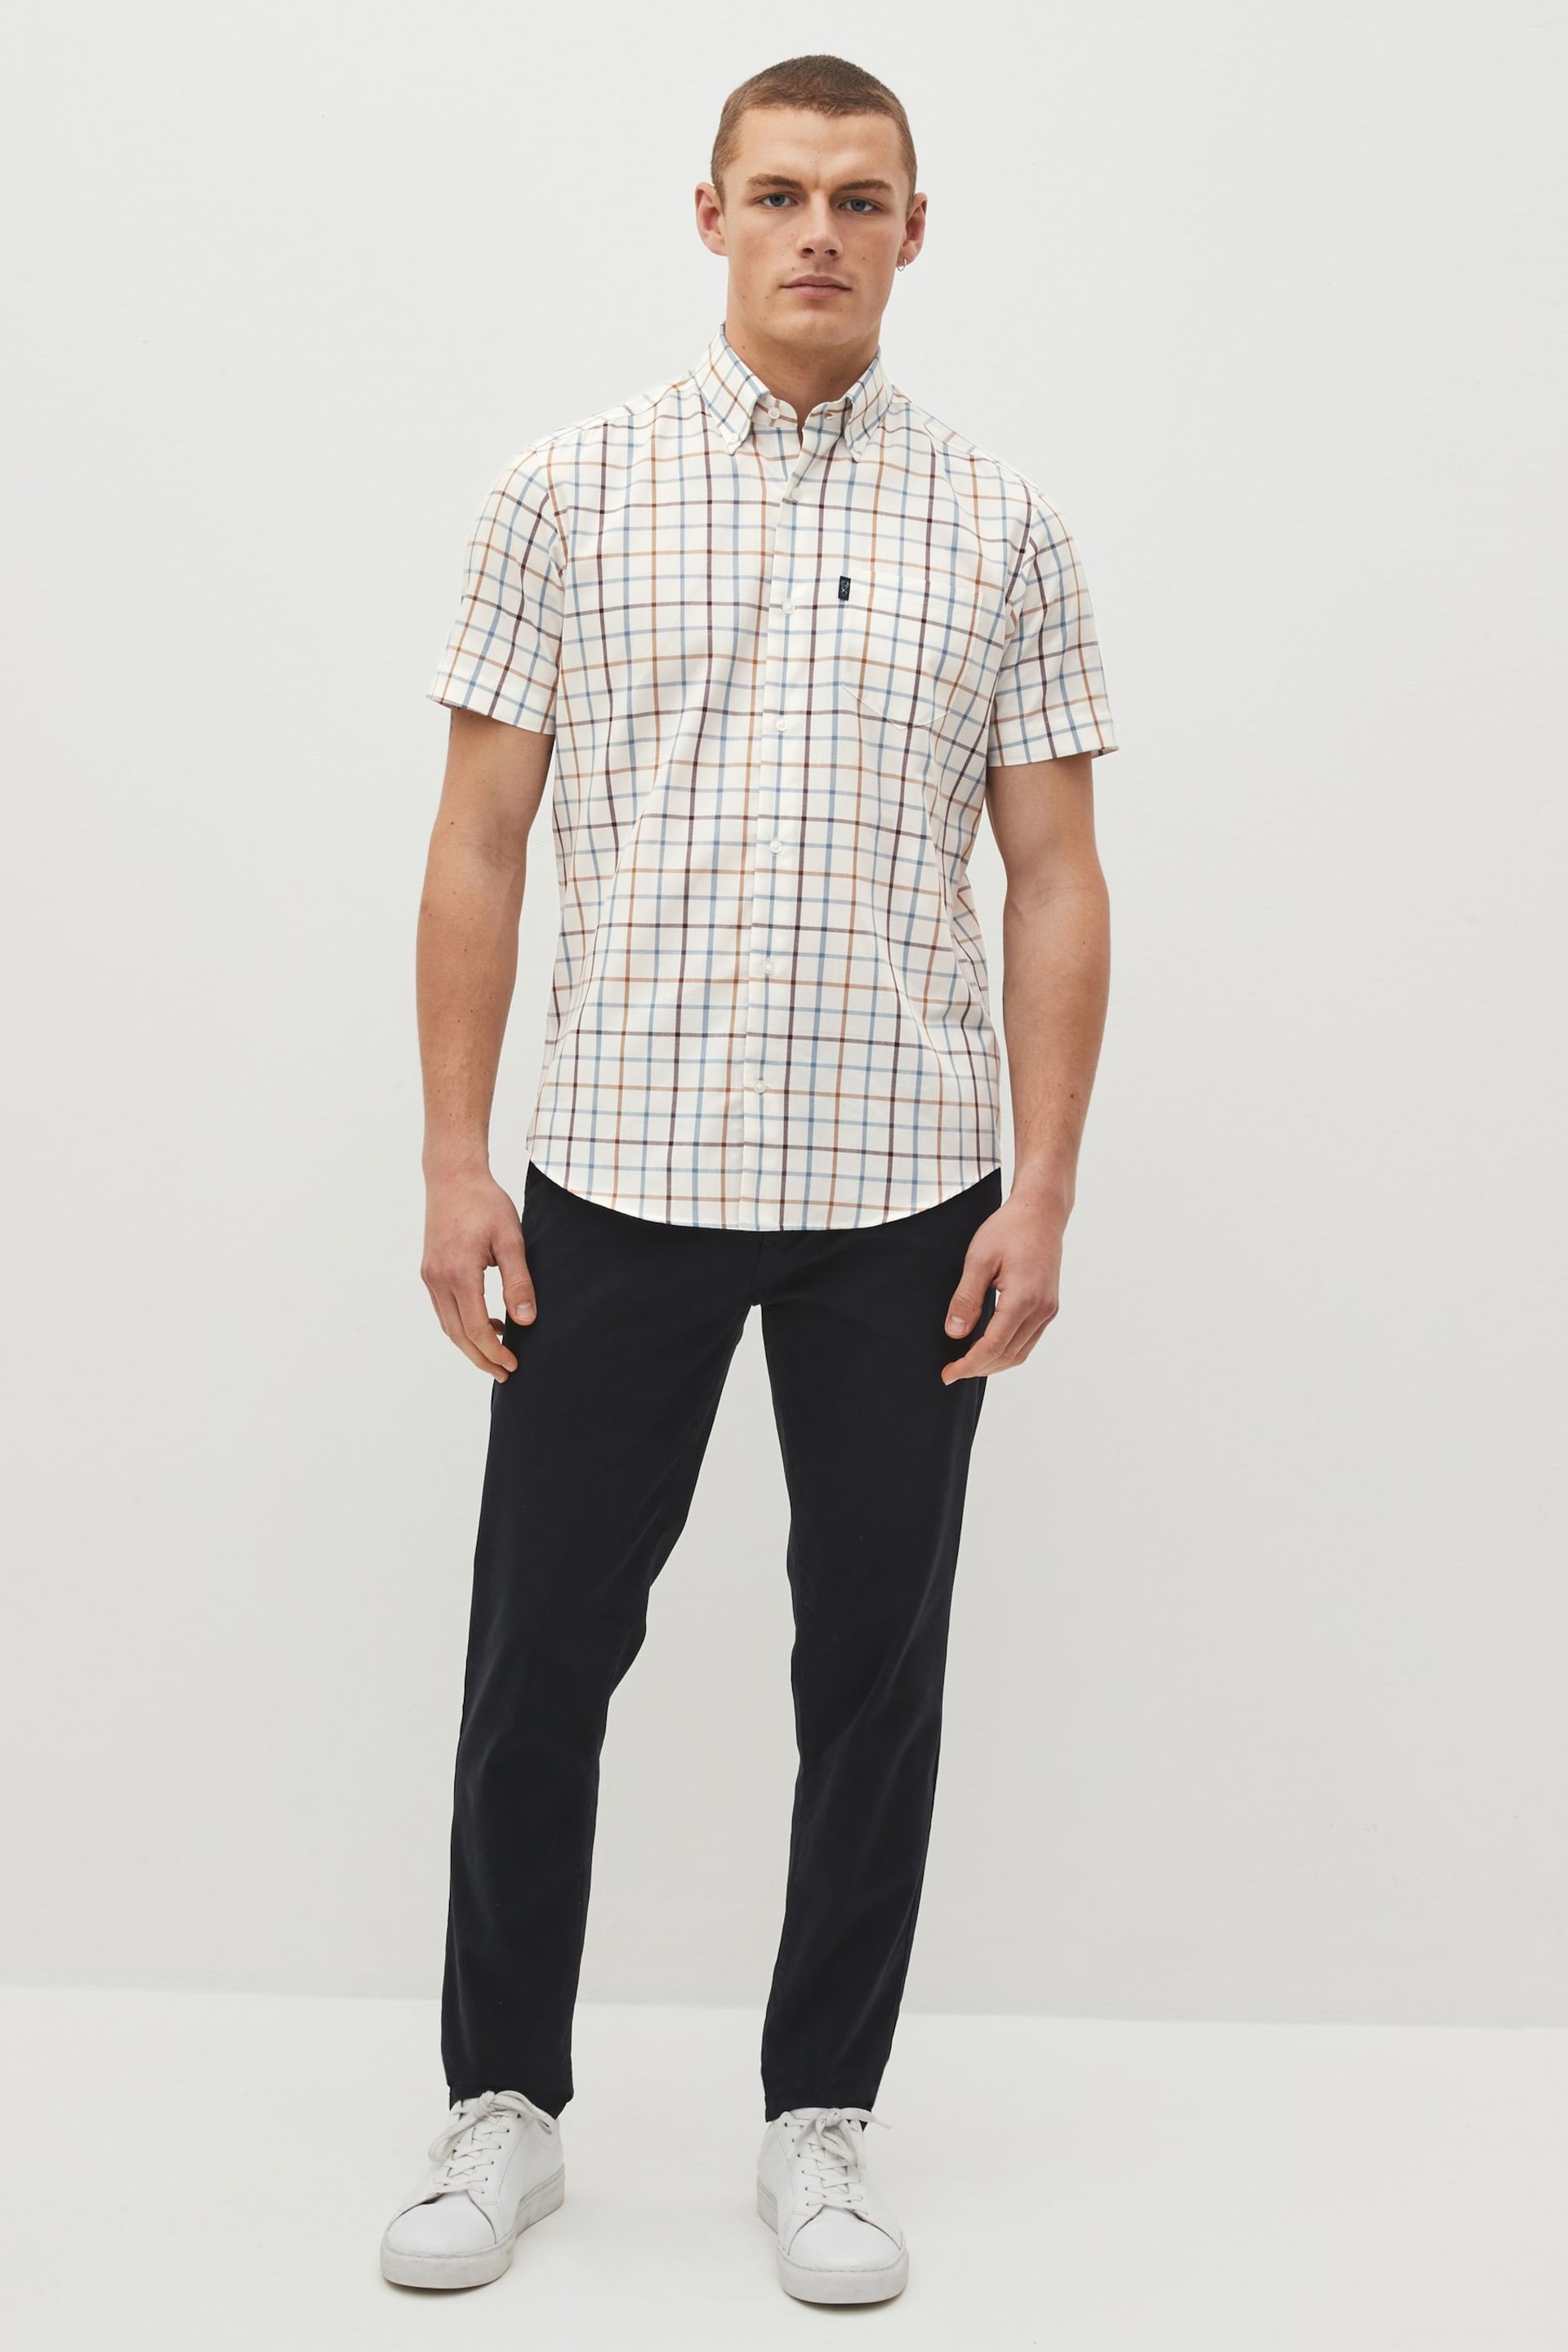 Cream/Blue Tattersall Check Easy Iron Button Down Oxford Shirt - Image 2 of 6